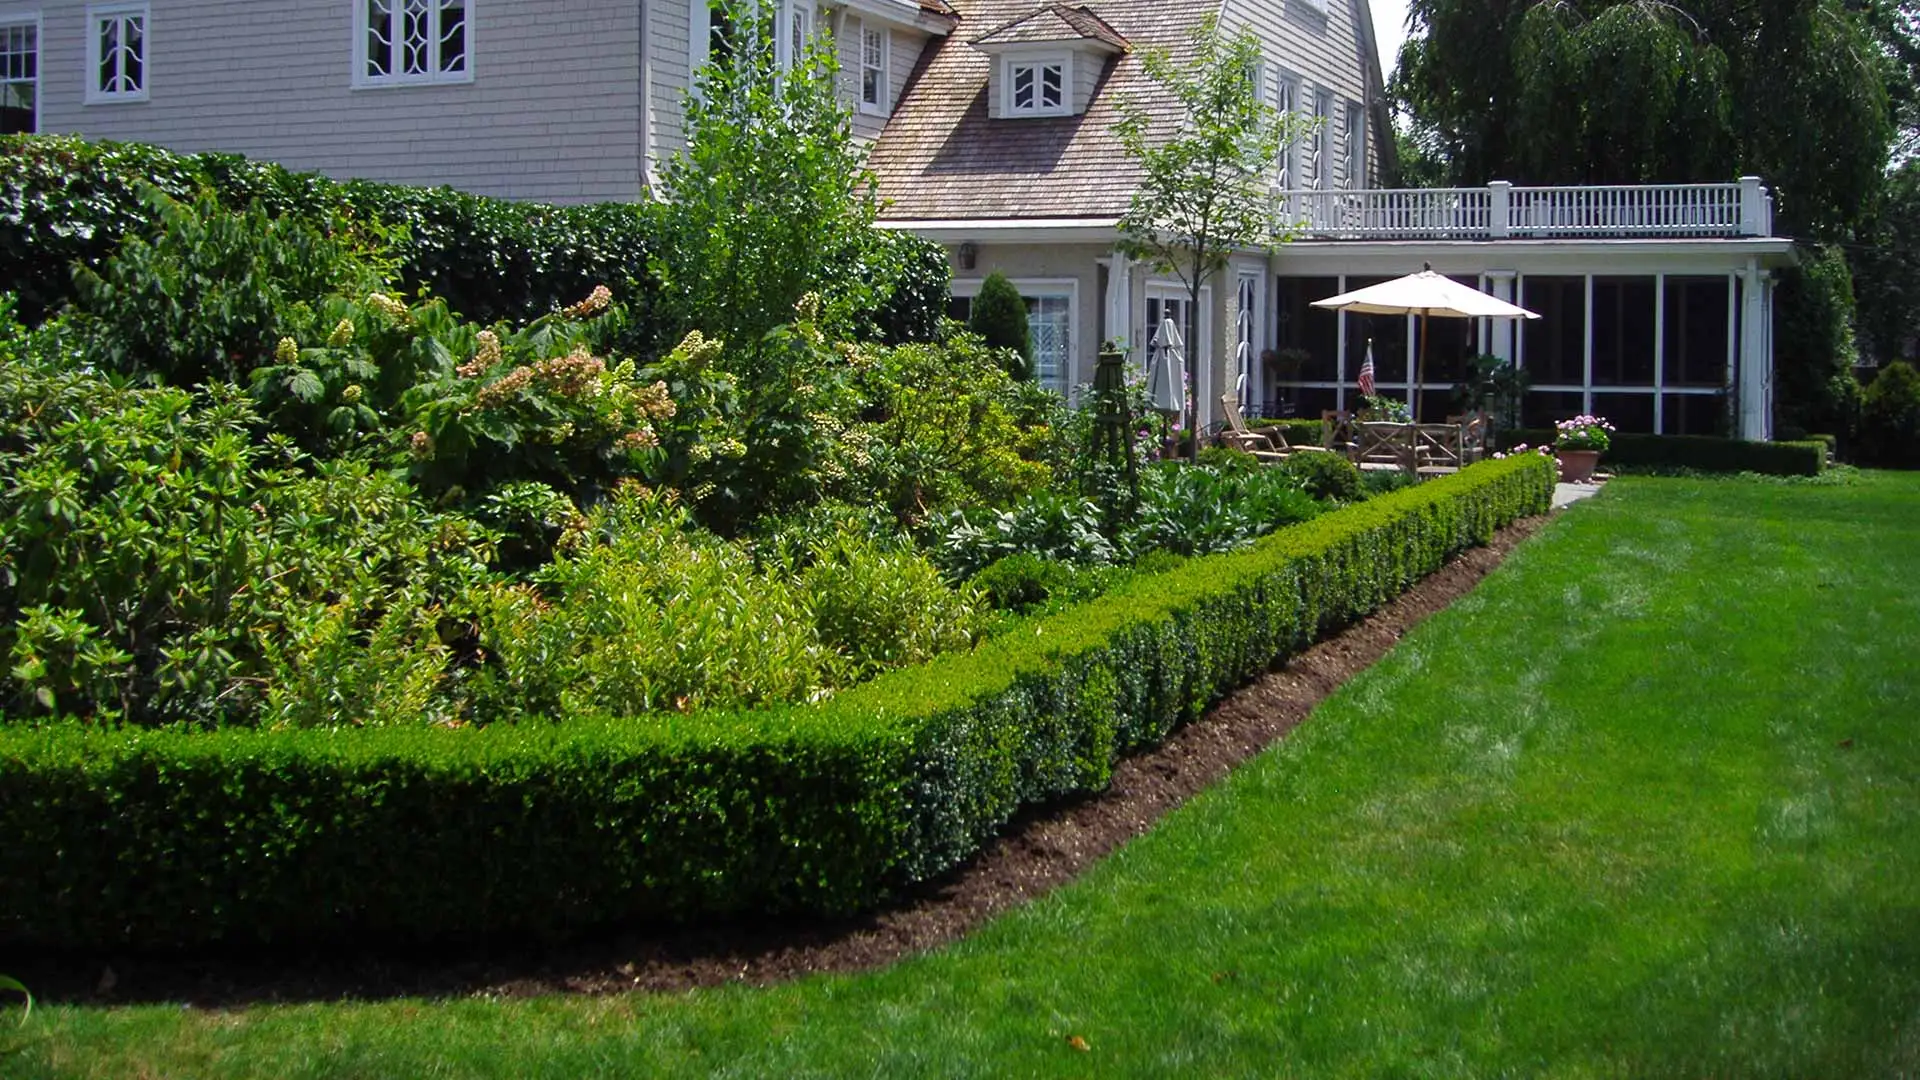 Healthy home lawn and maintained landscaping in Springfield Township, NJ.